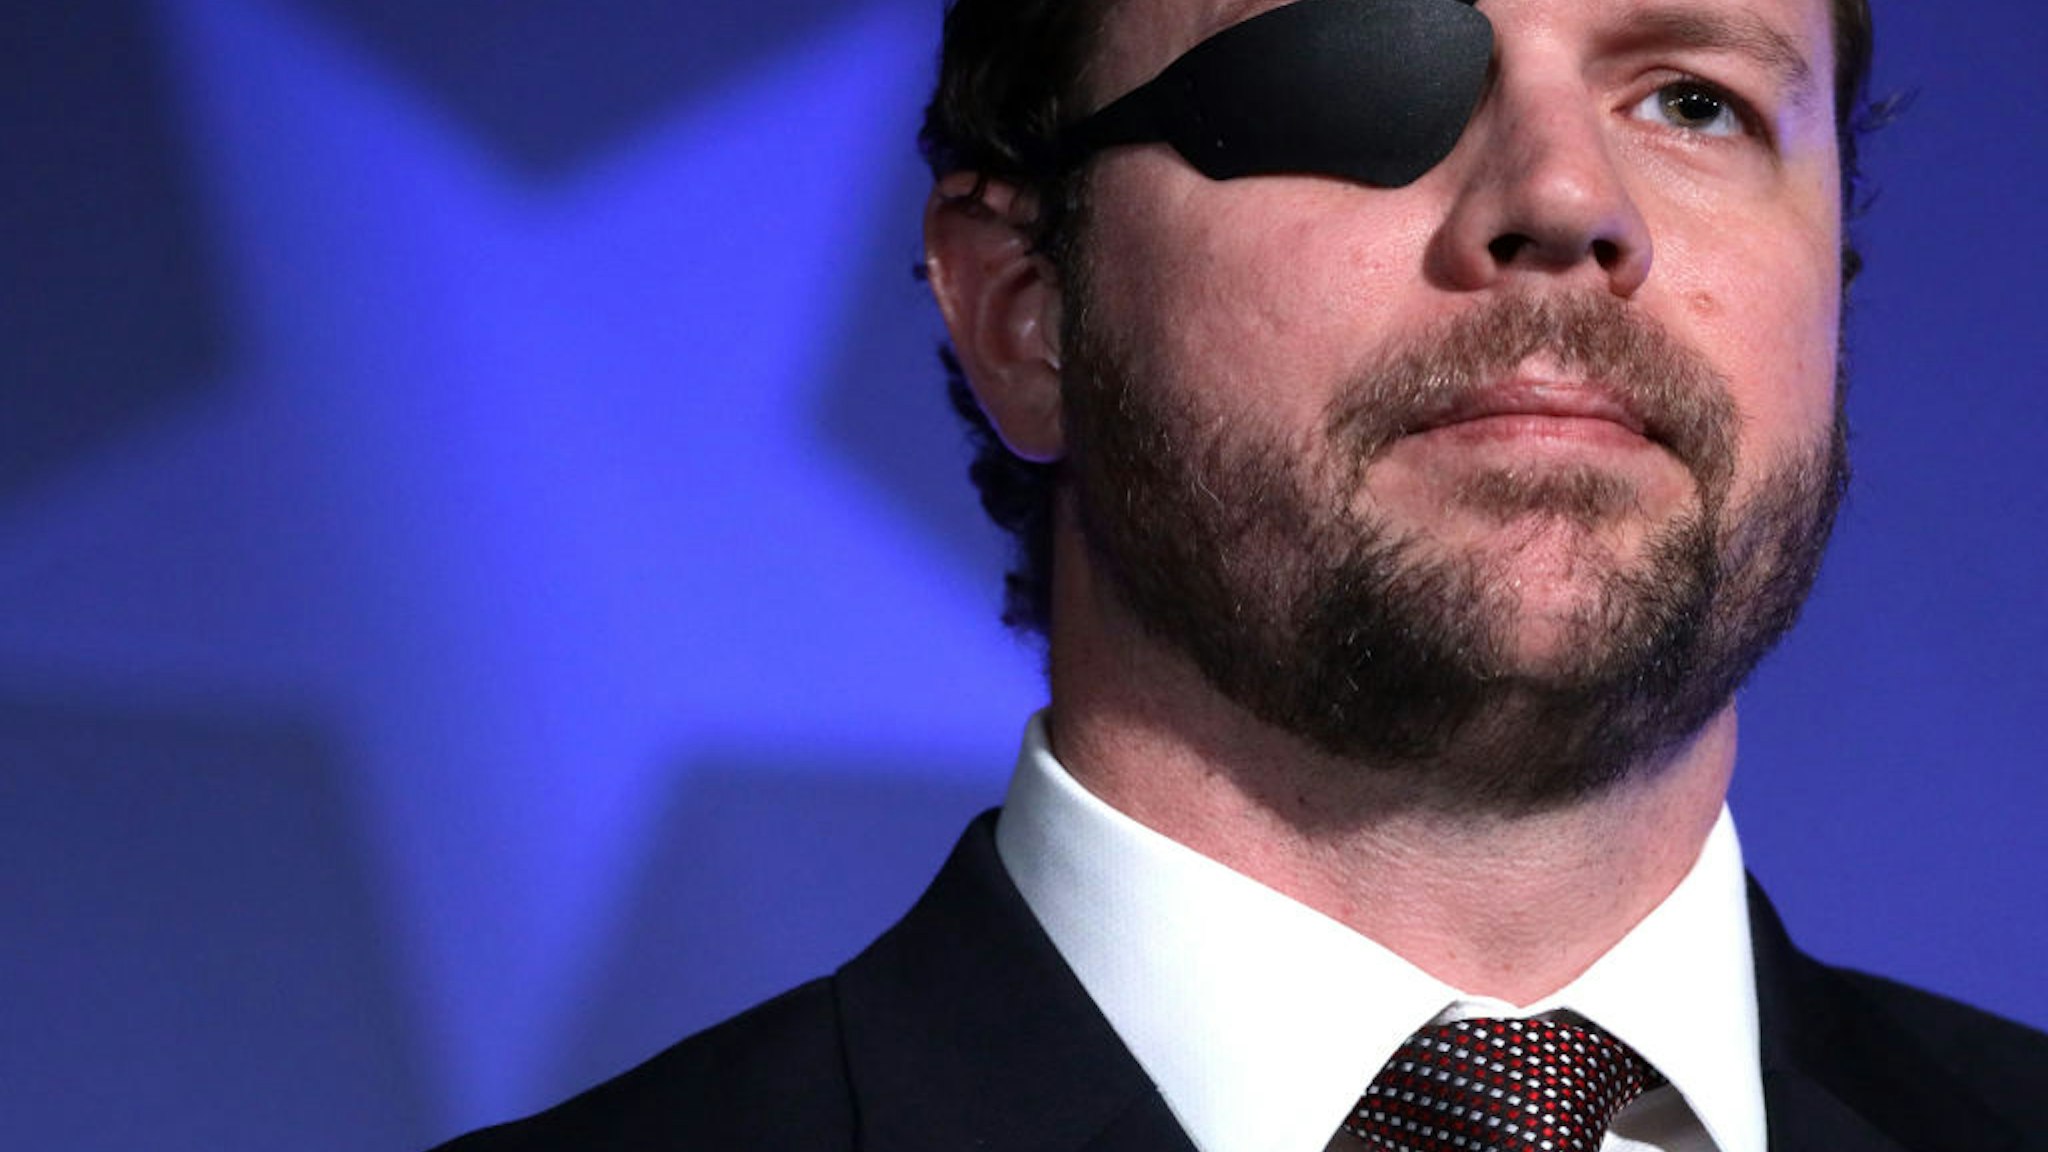 Rep. Dan Crenshaw called Tucker Carlson a "gross human being," but said he is not to blame for the Buffalo massacre